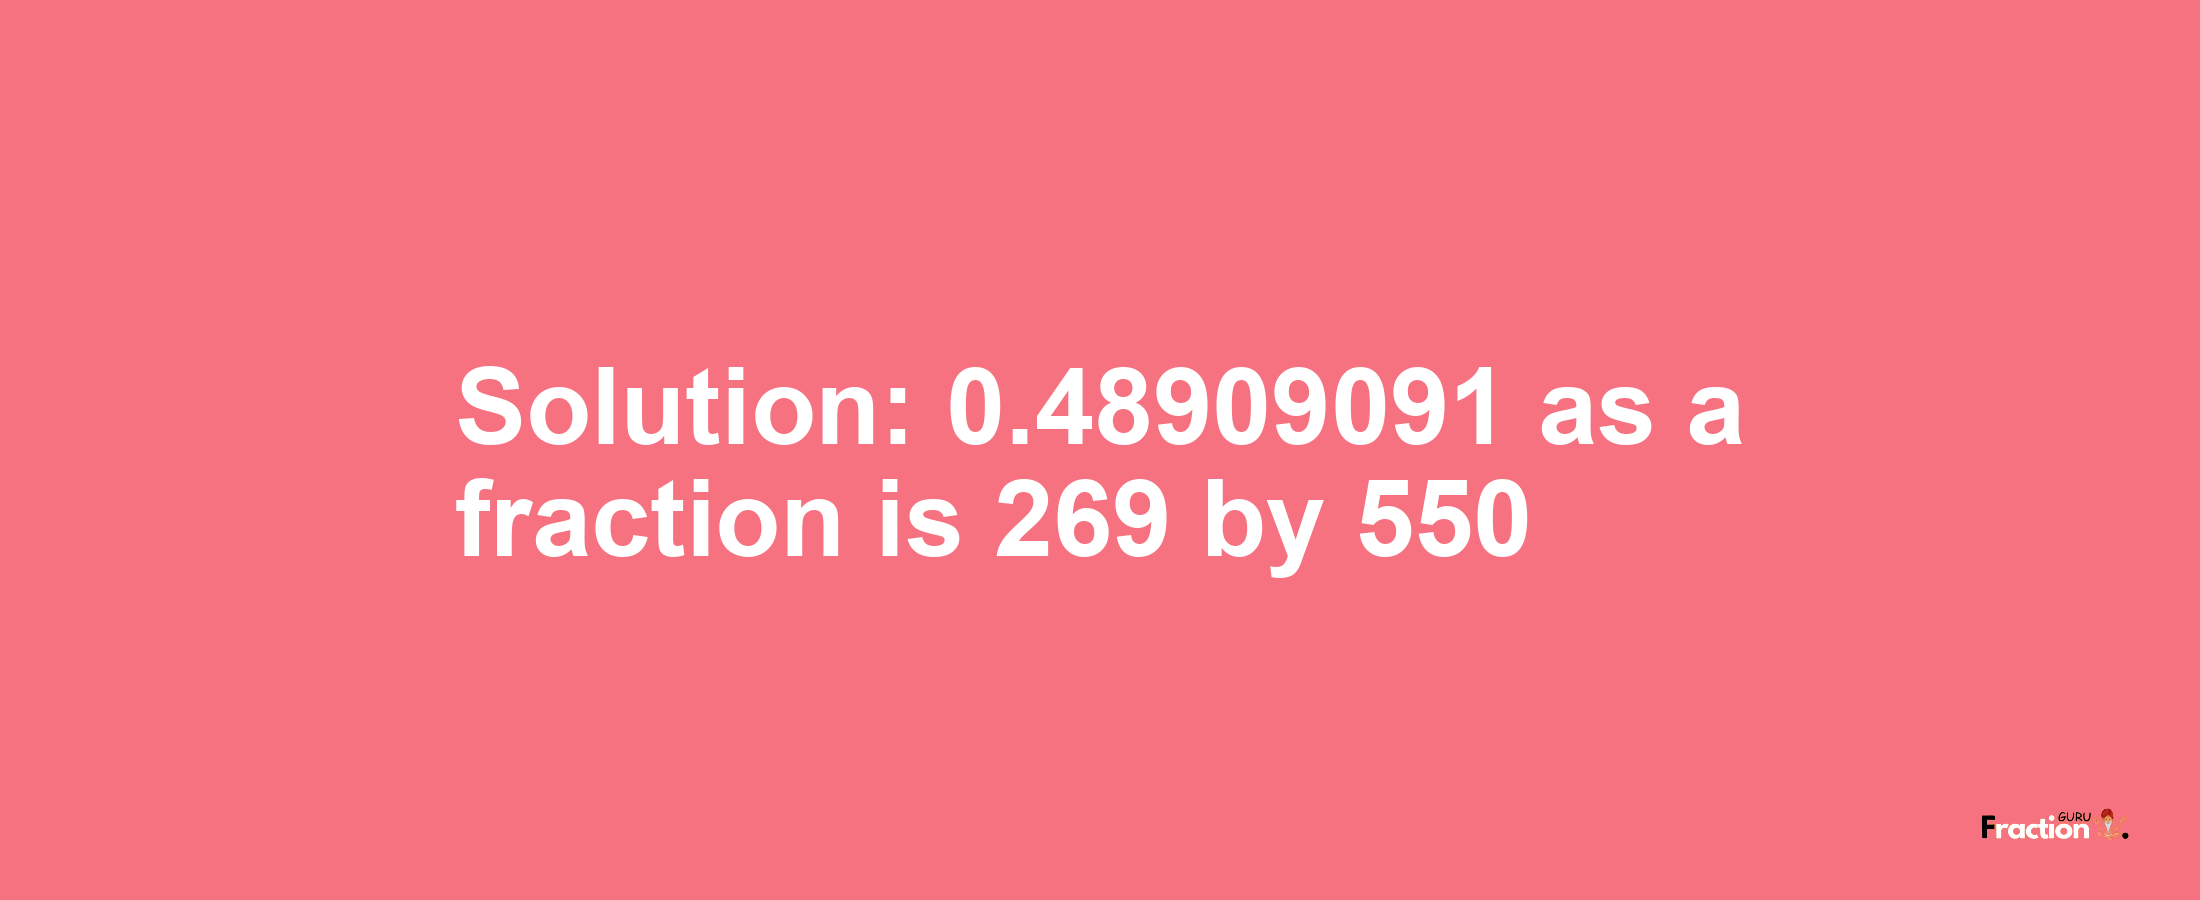 Solution:0.48909091 as a fraction is 269/550